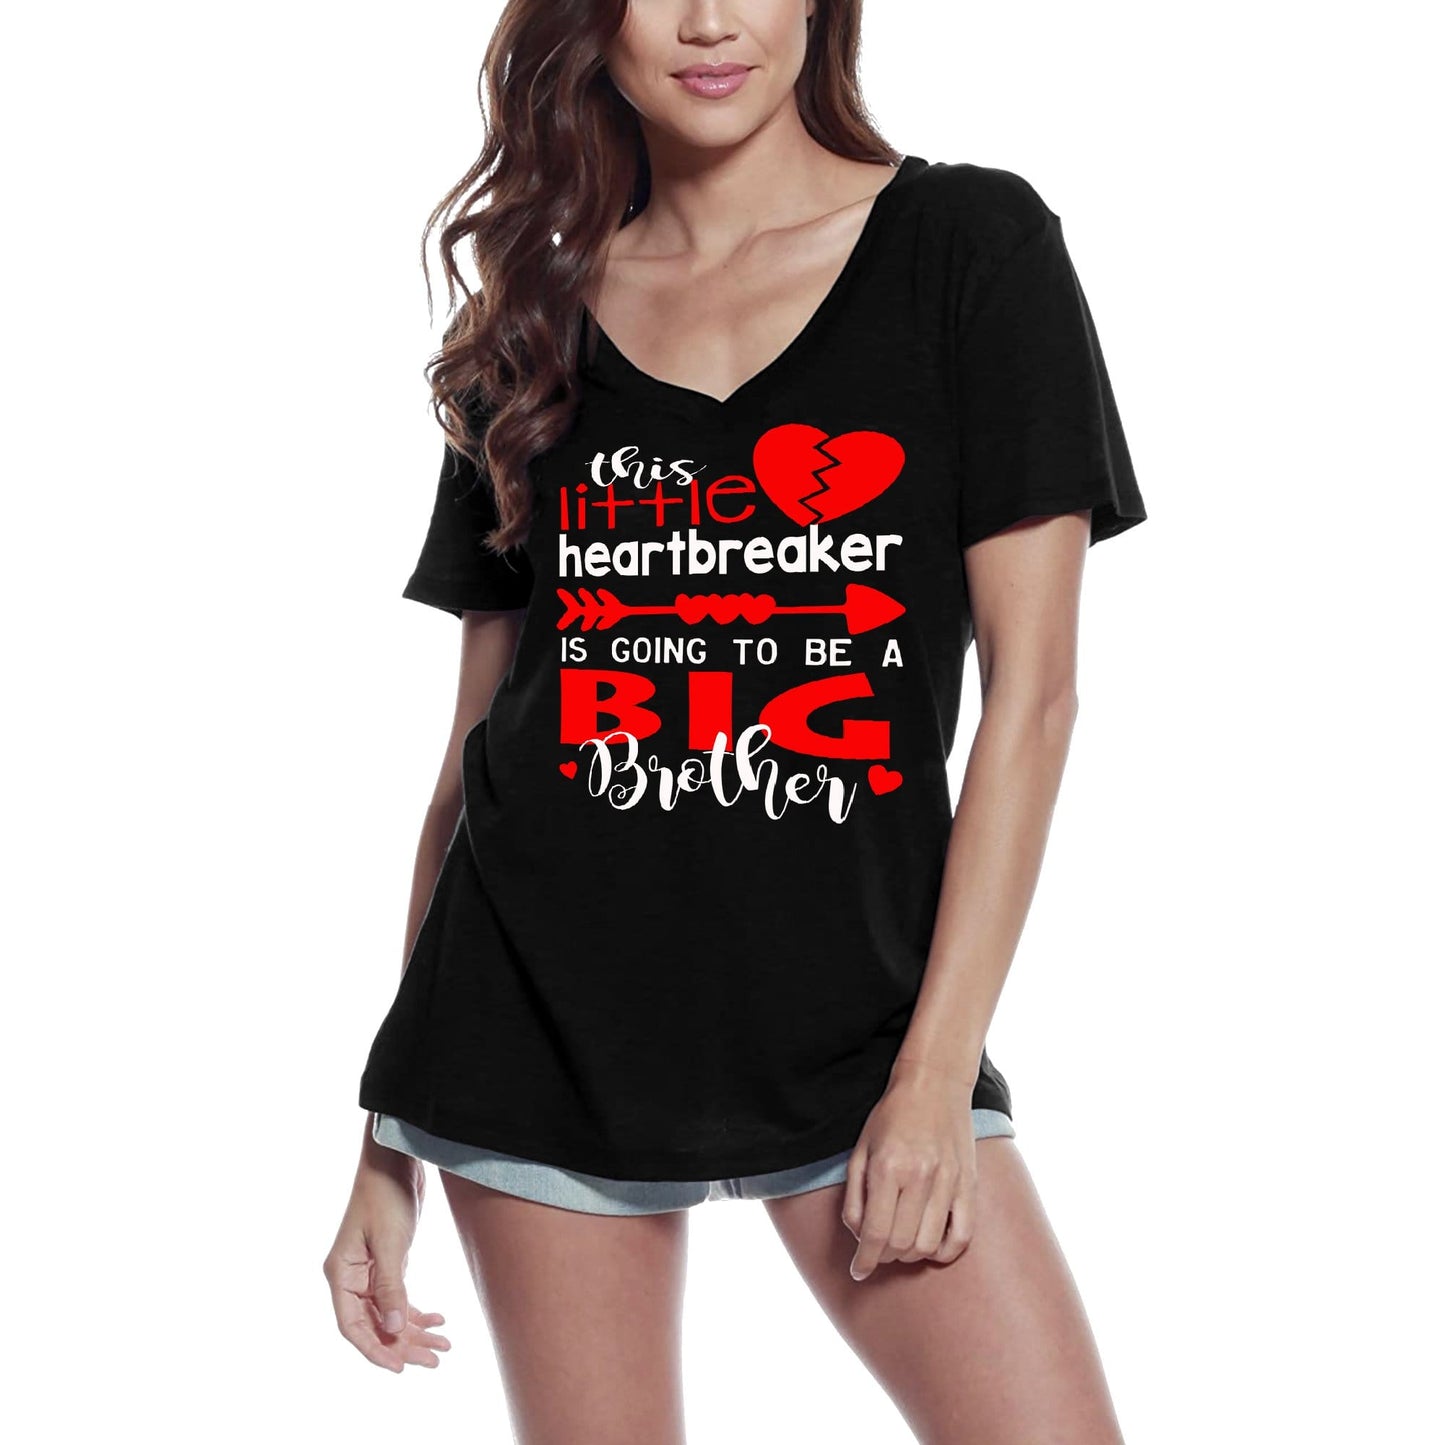 ULTRABASIC Women's T-Shirt This Little Heartbreaker is Going to be Big Brother - Valentine's Day Short Sleeve Graphic Tees Tops